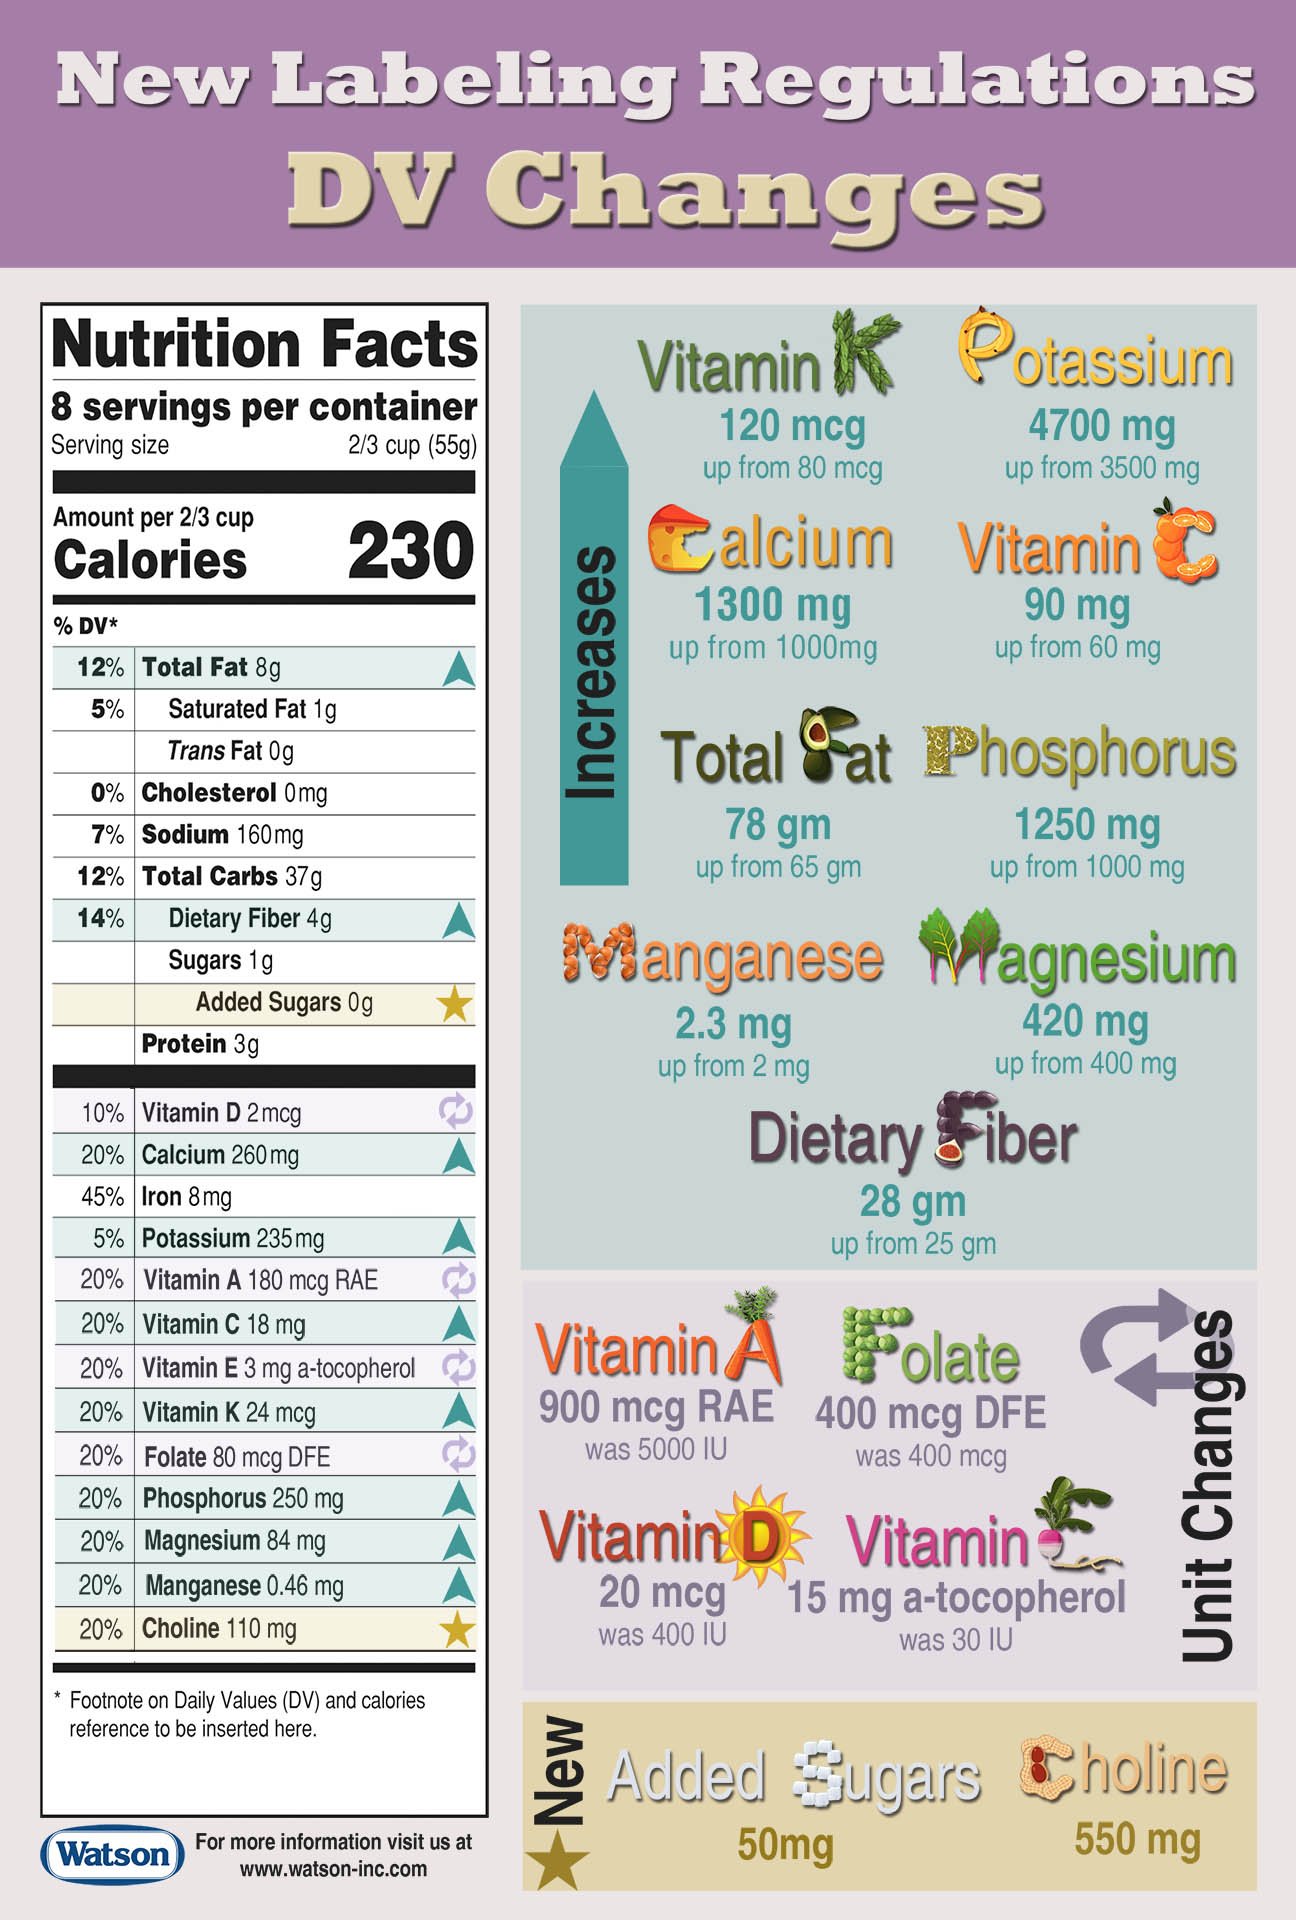 Nutrition Facts Label Changes Infographics